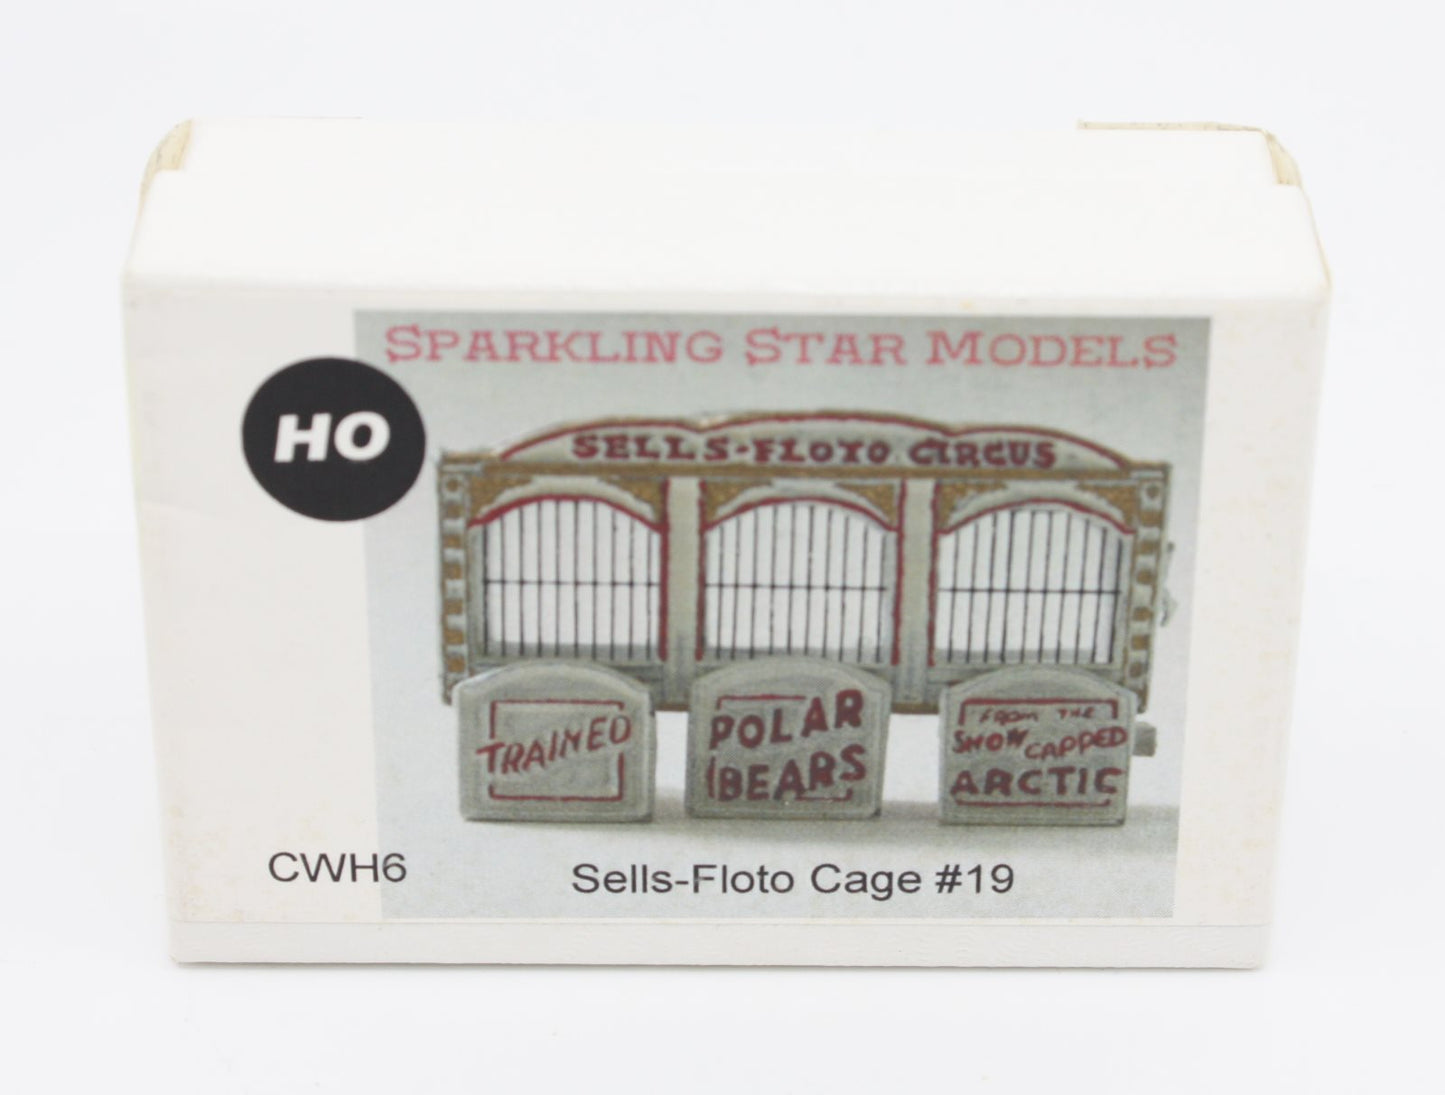 Sparkling Star Models CWH6 HO Scale Sells Floto Cage Wagon Kit